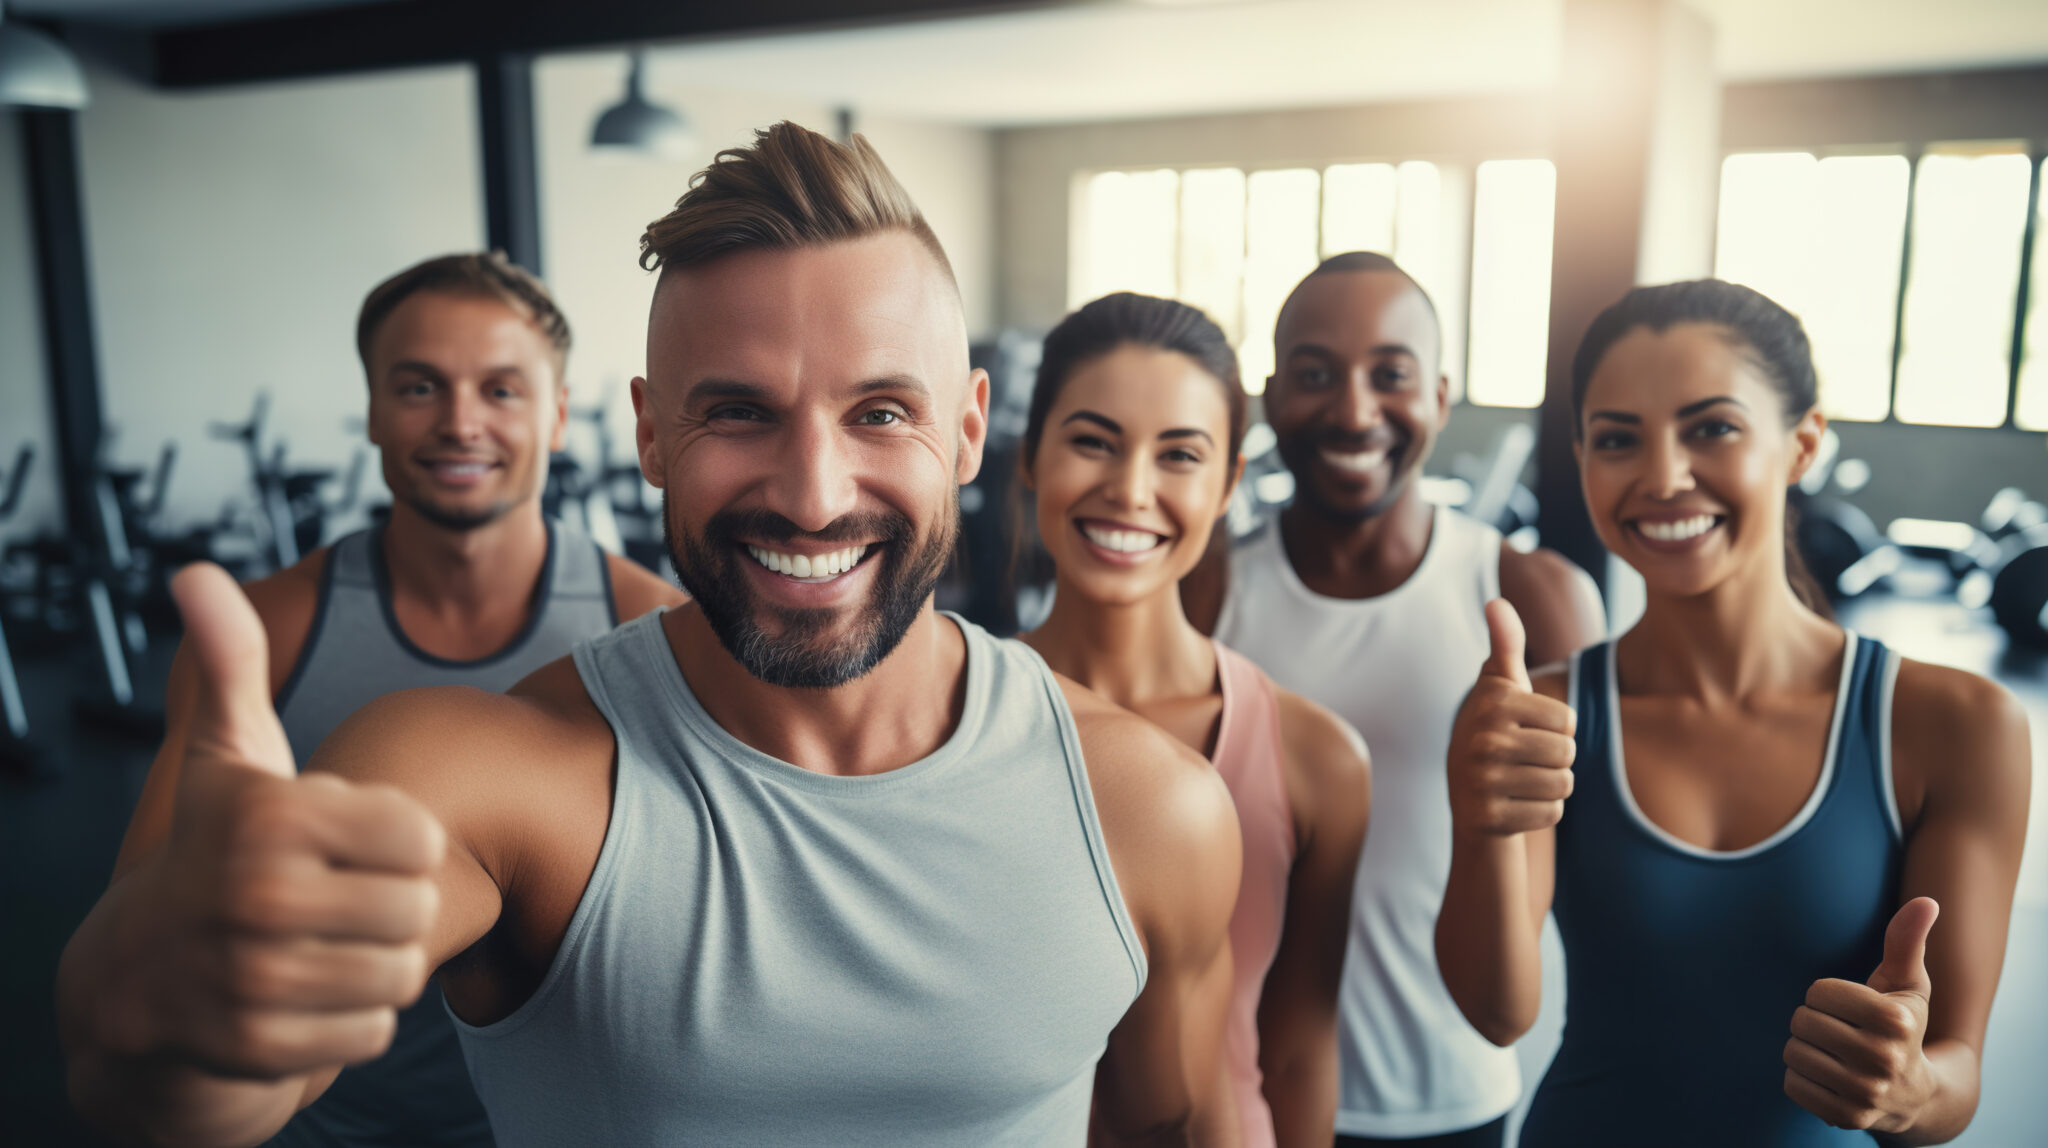 group of smiling people in sportswear showing thumbs up in gym